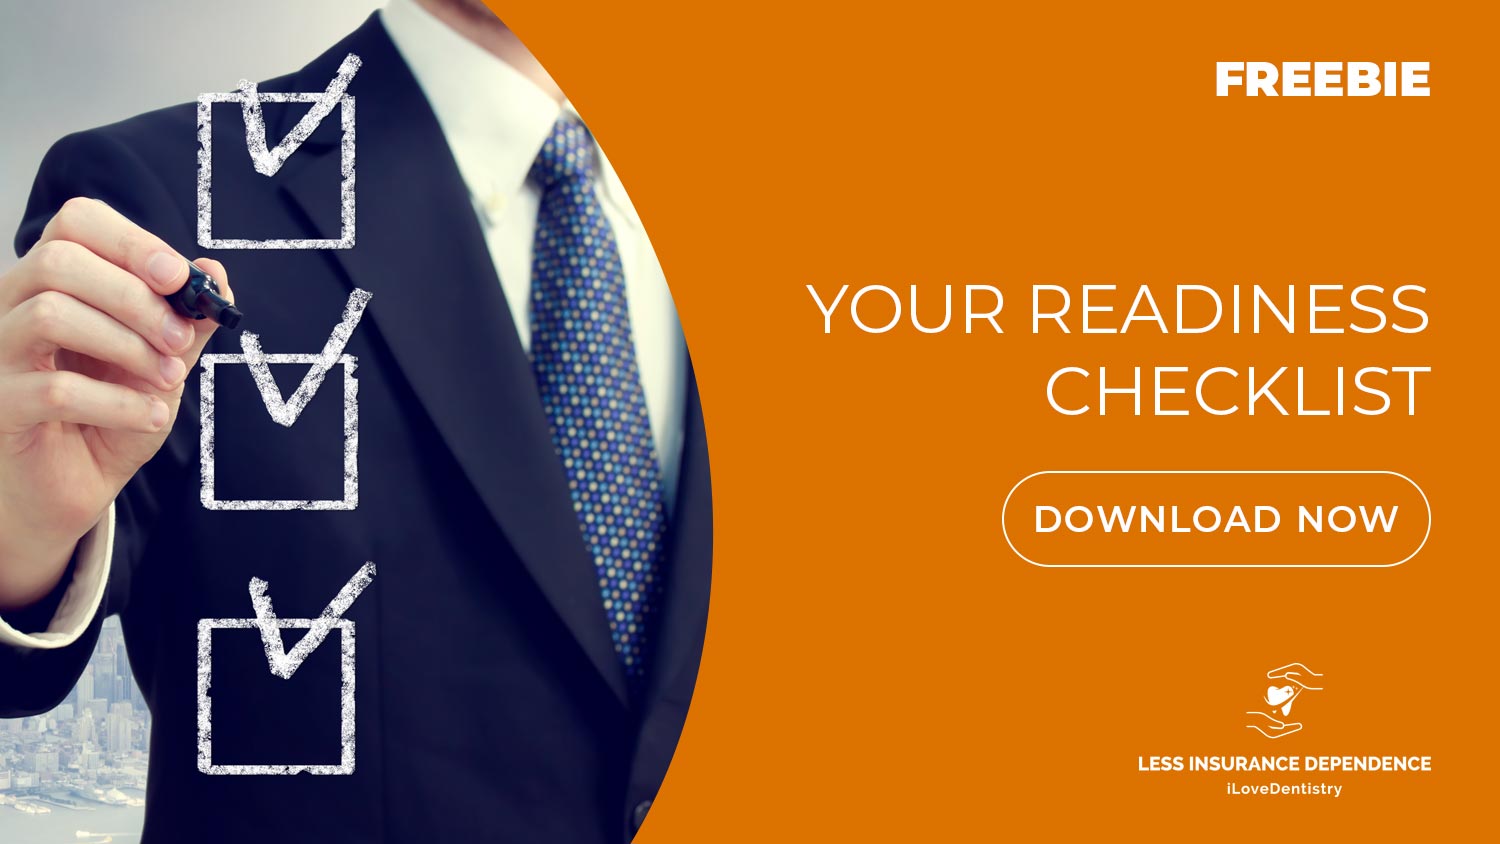 Your Readiness Checklist